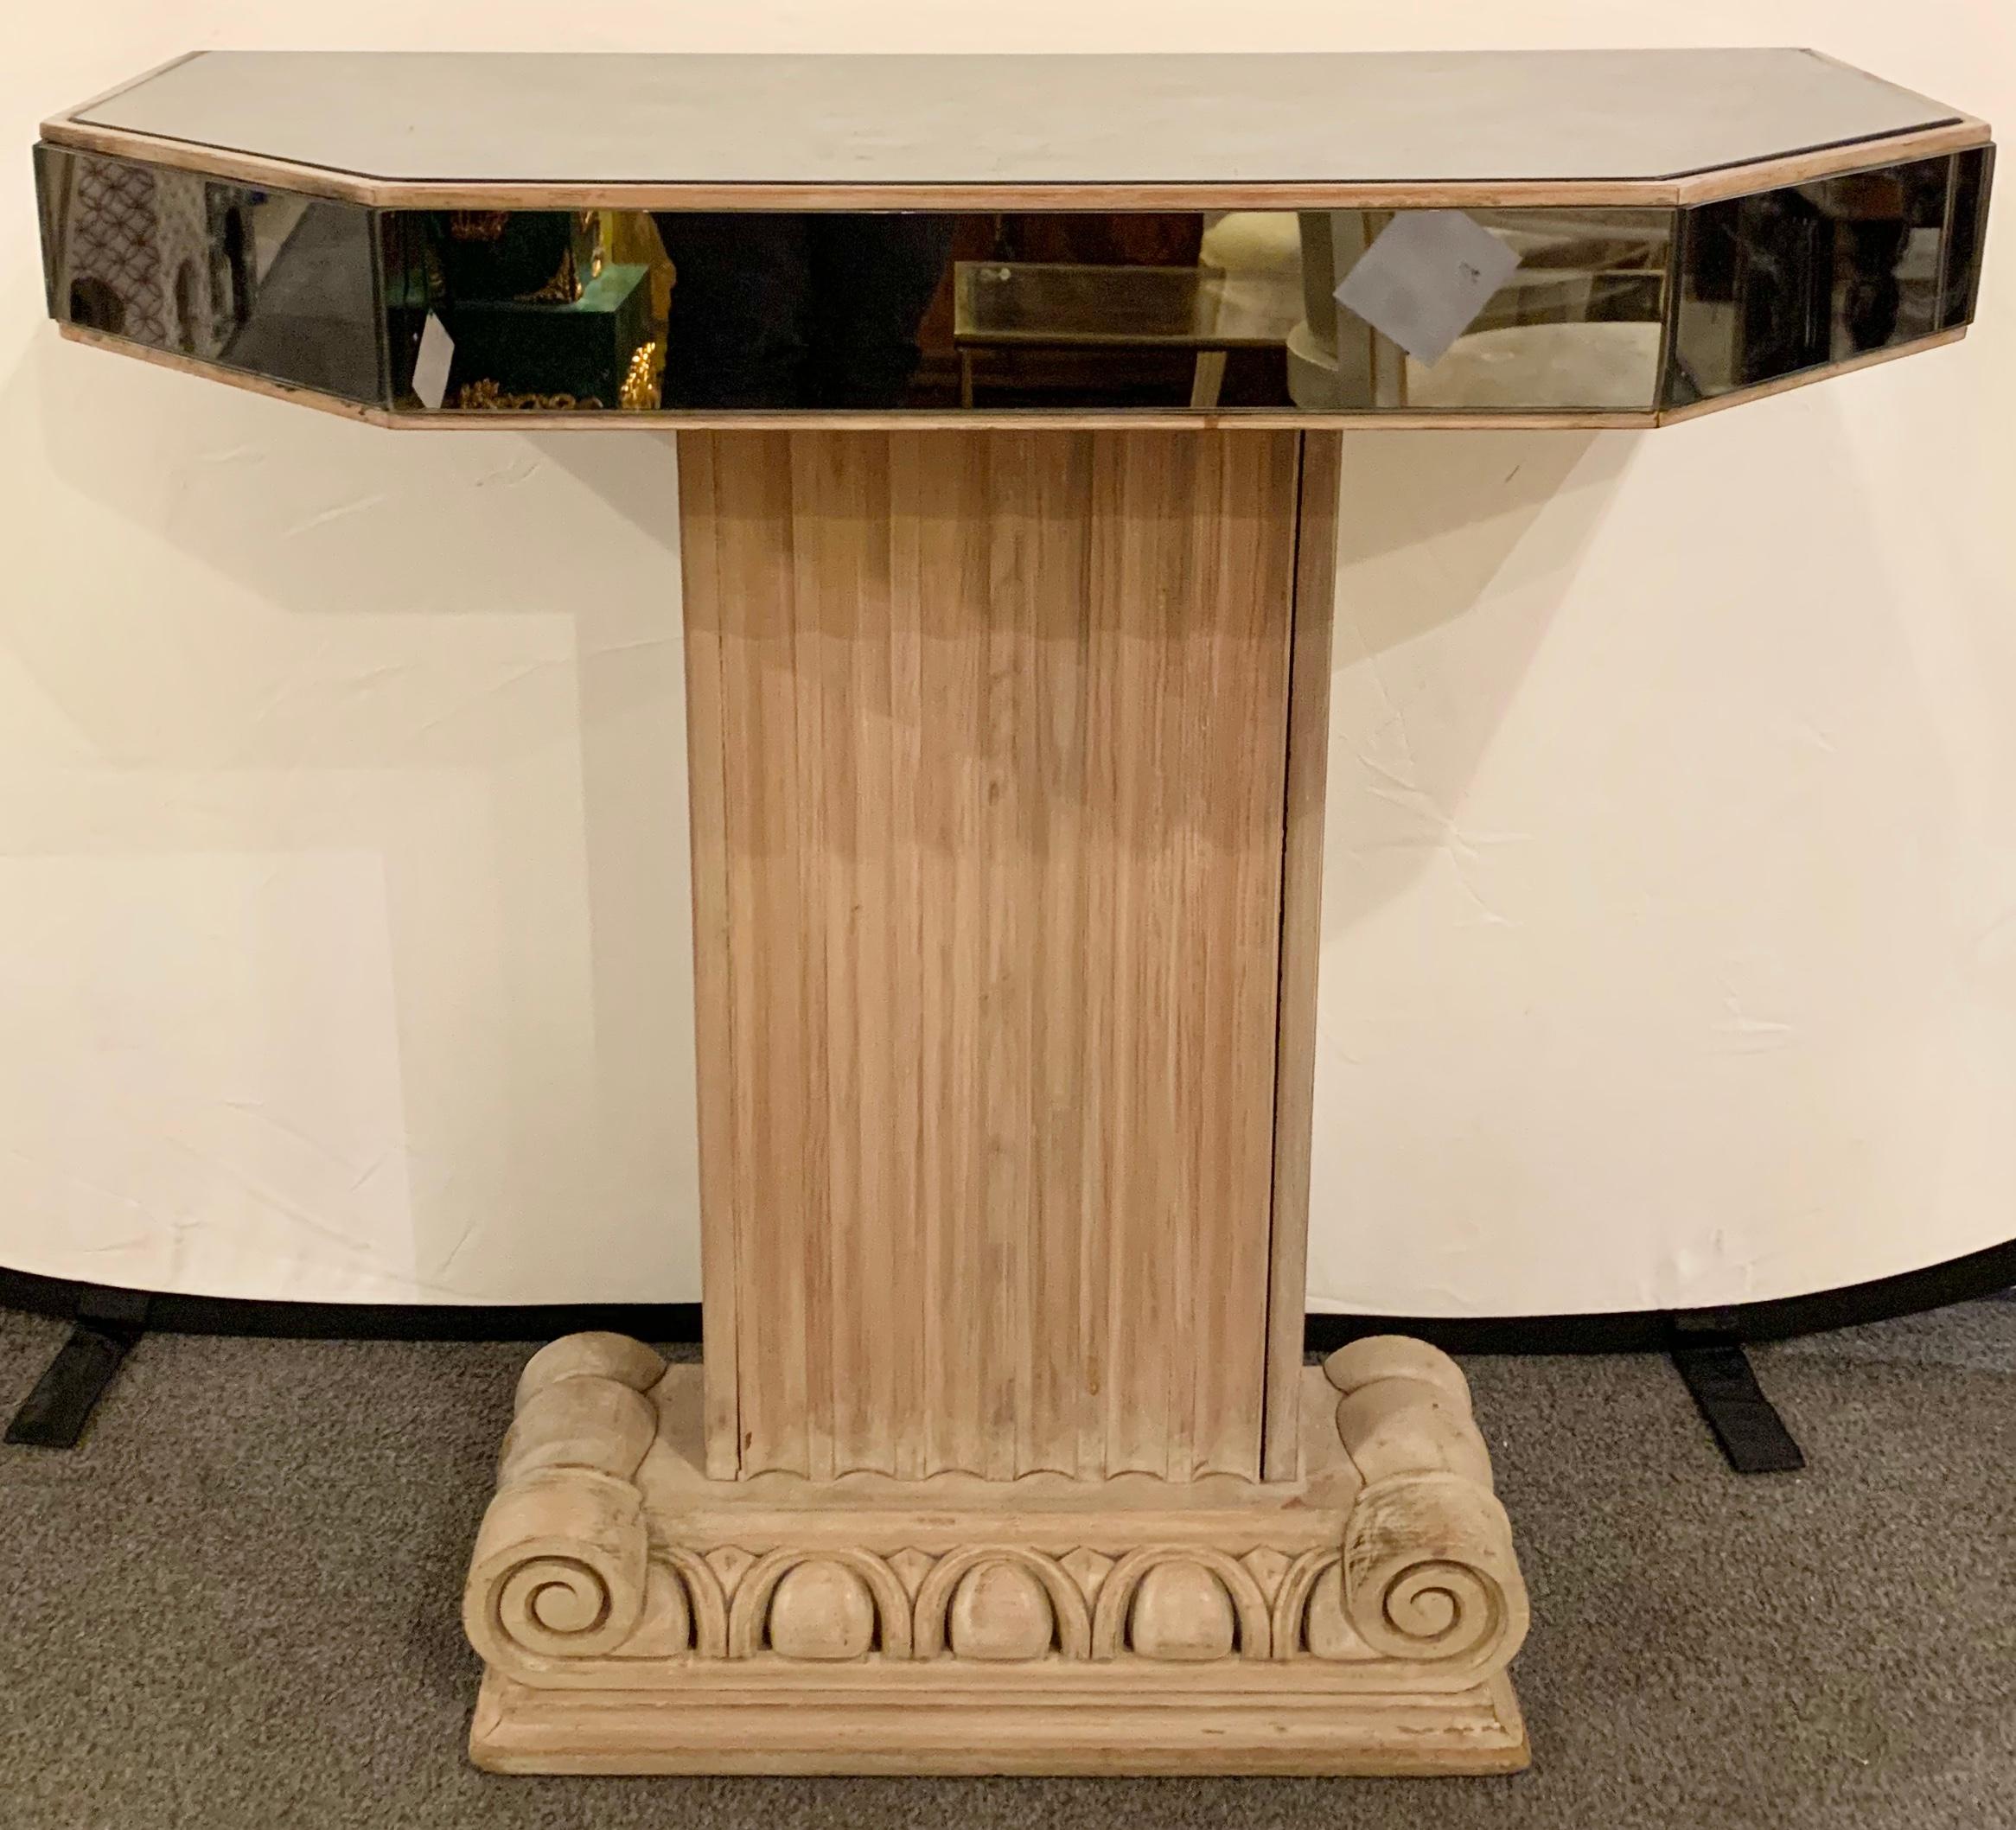 Lorin Jackson for Grosfeld house mirror and cerused oak console 
Neoclassical mirrored top console table, canted print corners on inverse fluted ionic column base in limed oak. Executed by Grosfeld House.
American, circa 1940.
  